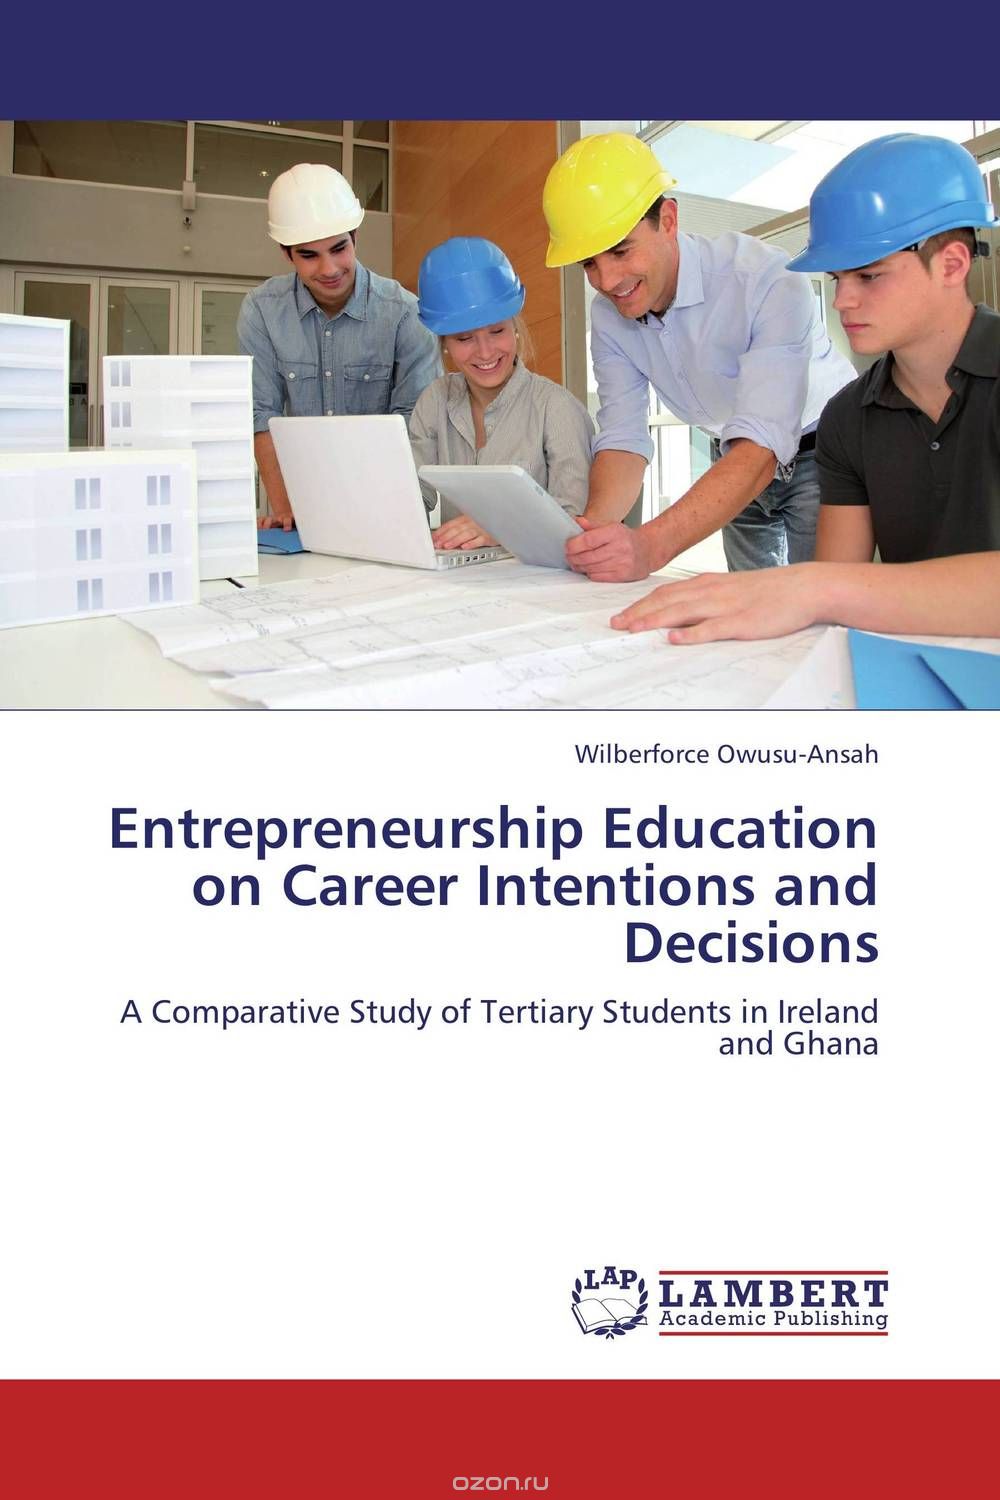 Entrepreneurship Education on Career Intentions and Decisions